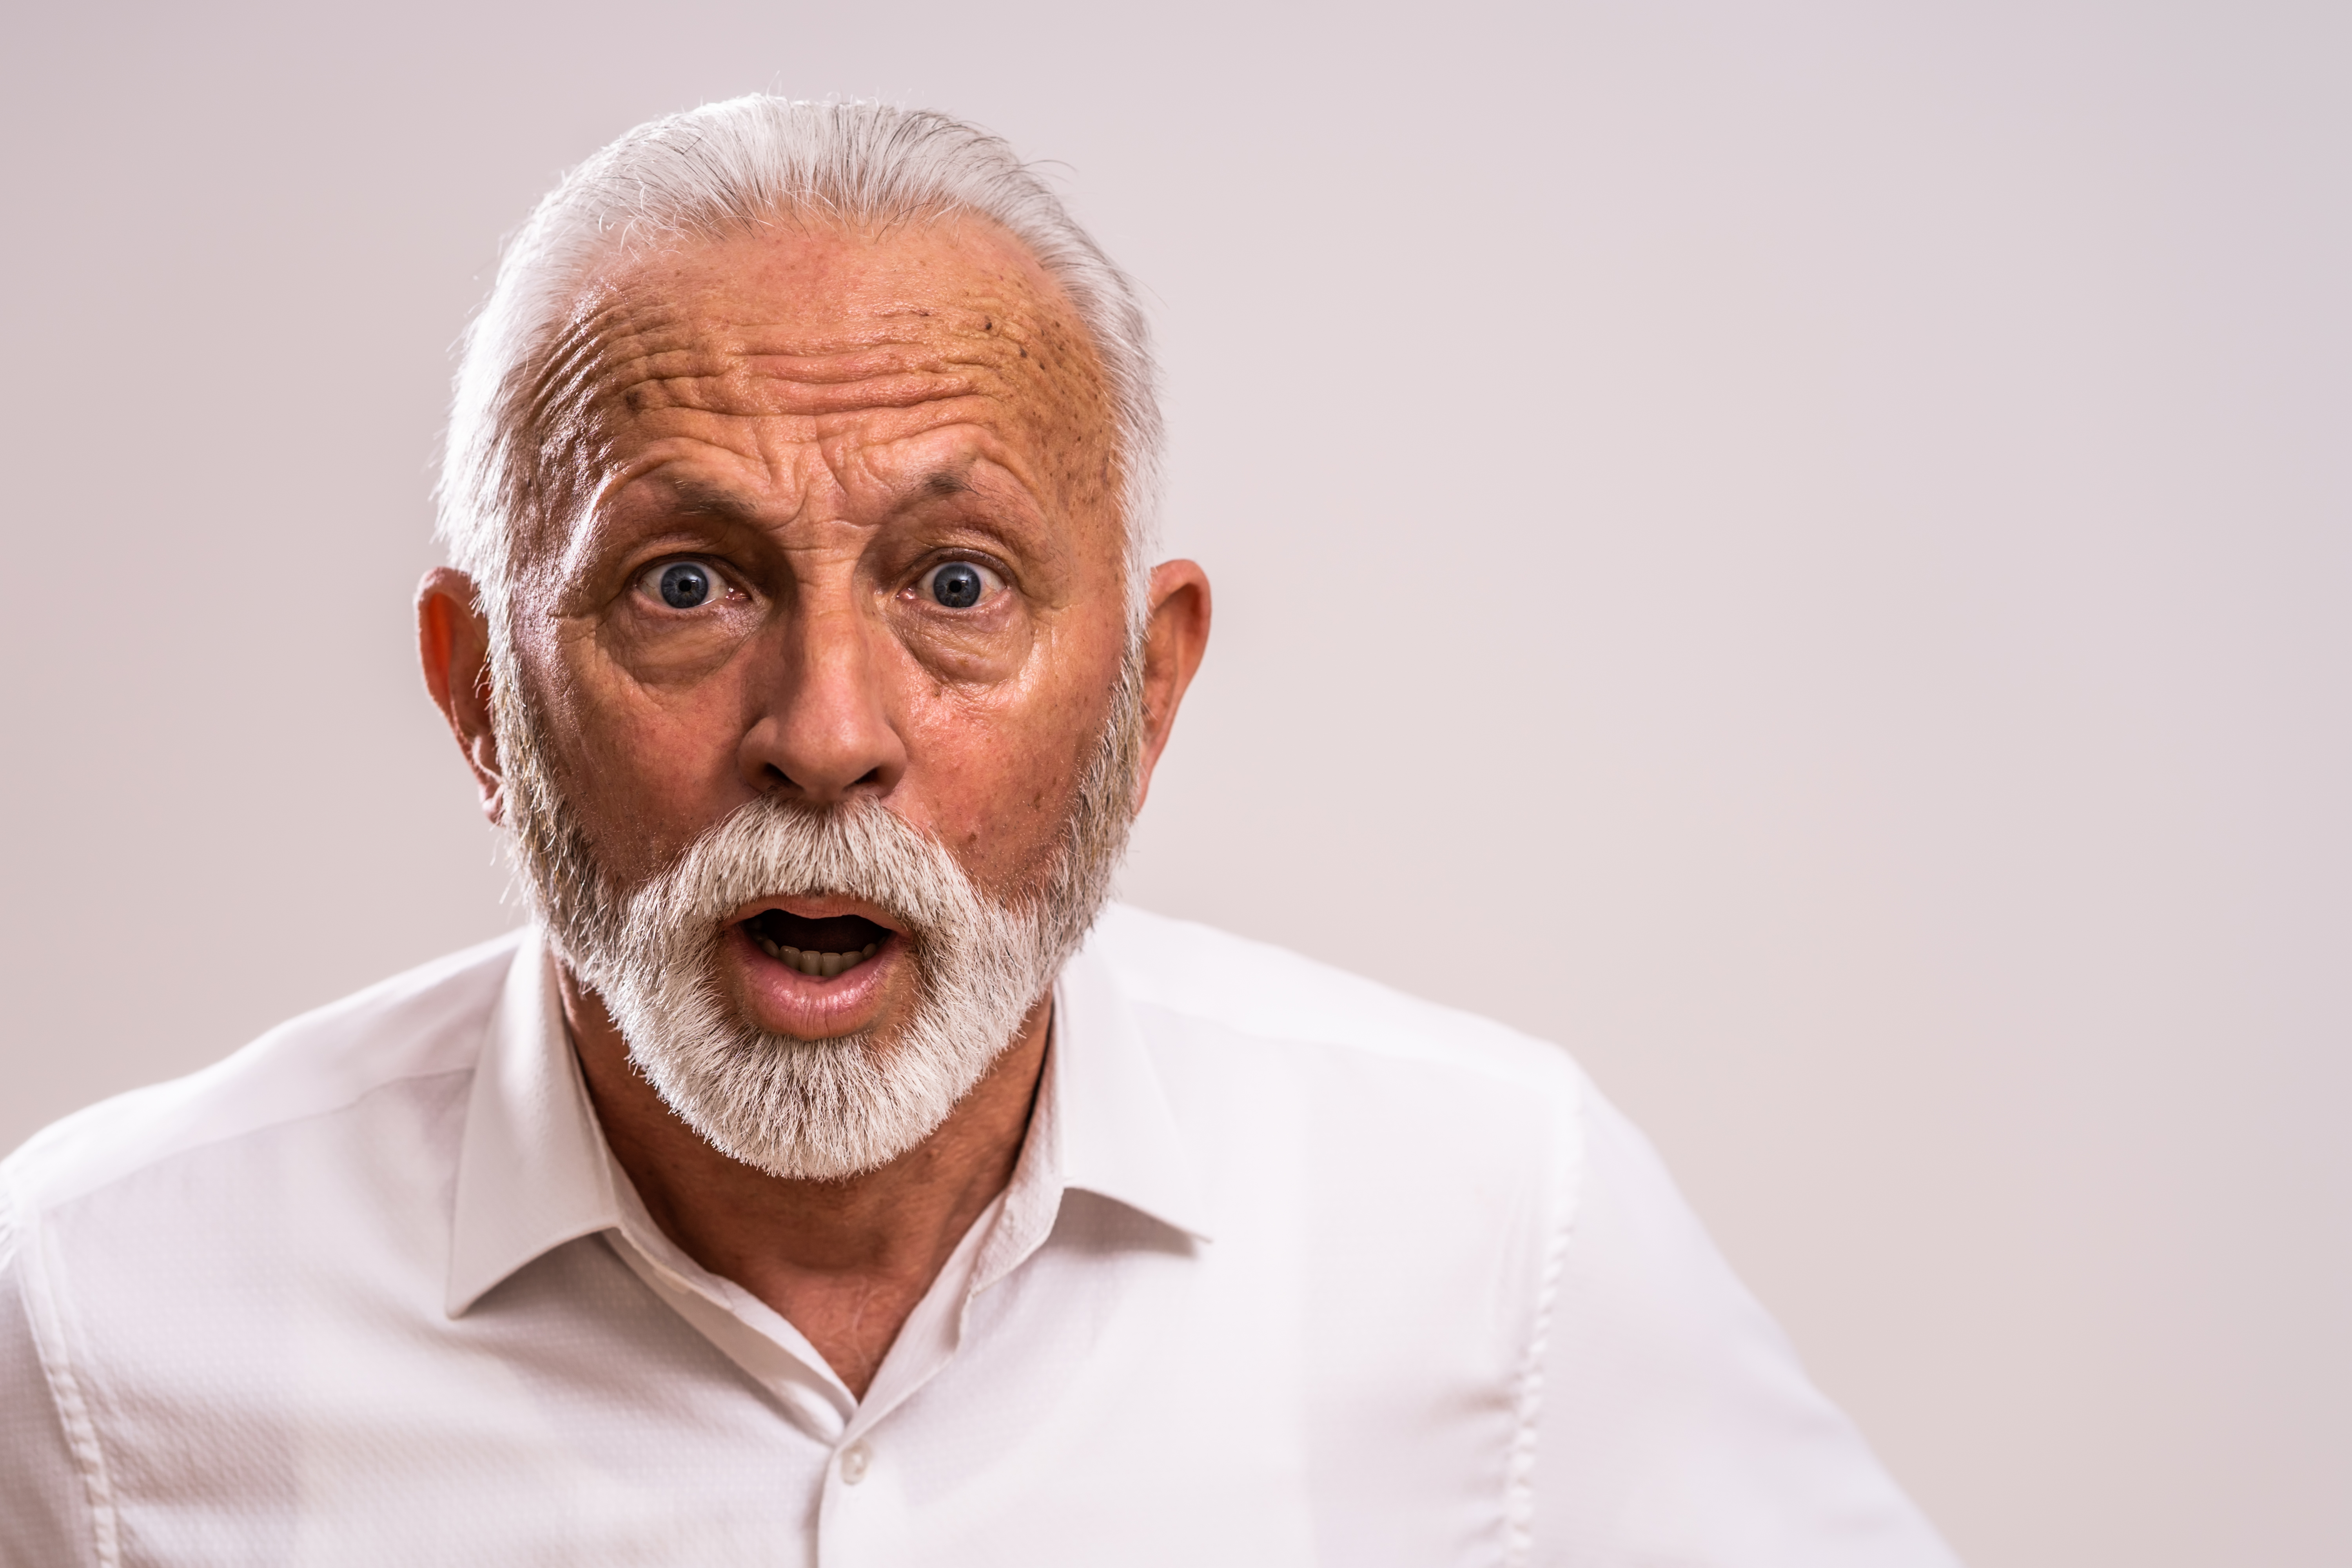 A shocked senior man | Source: Getty Images